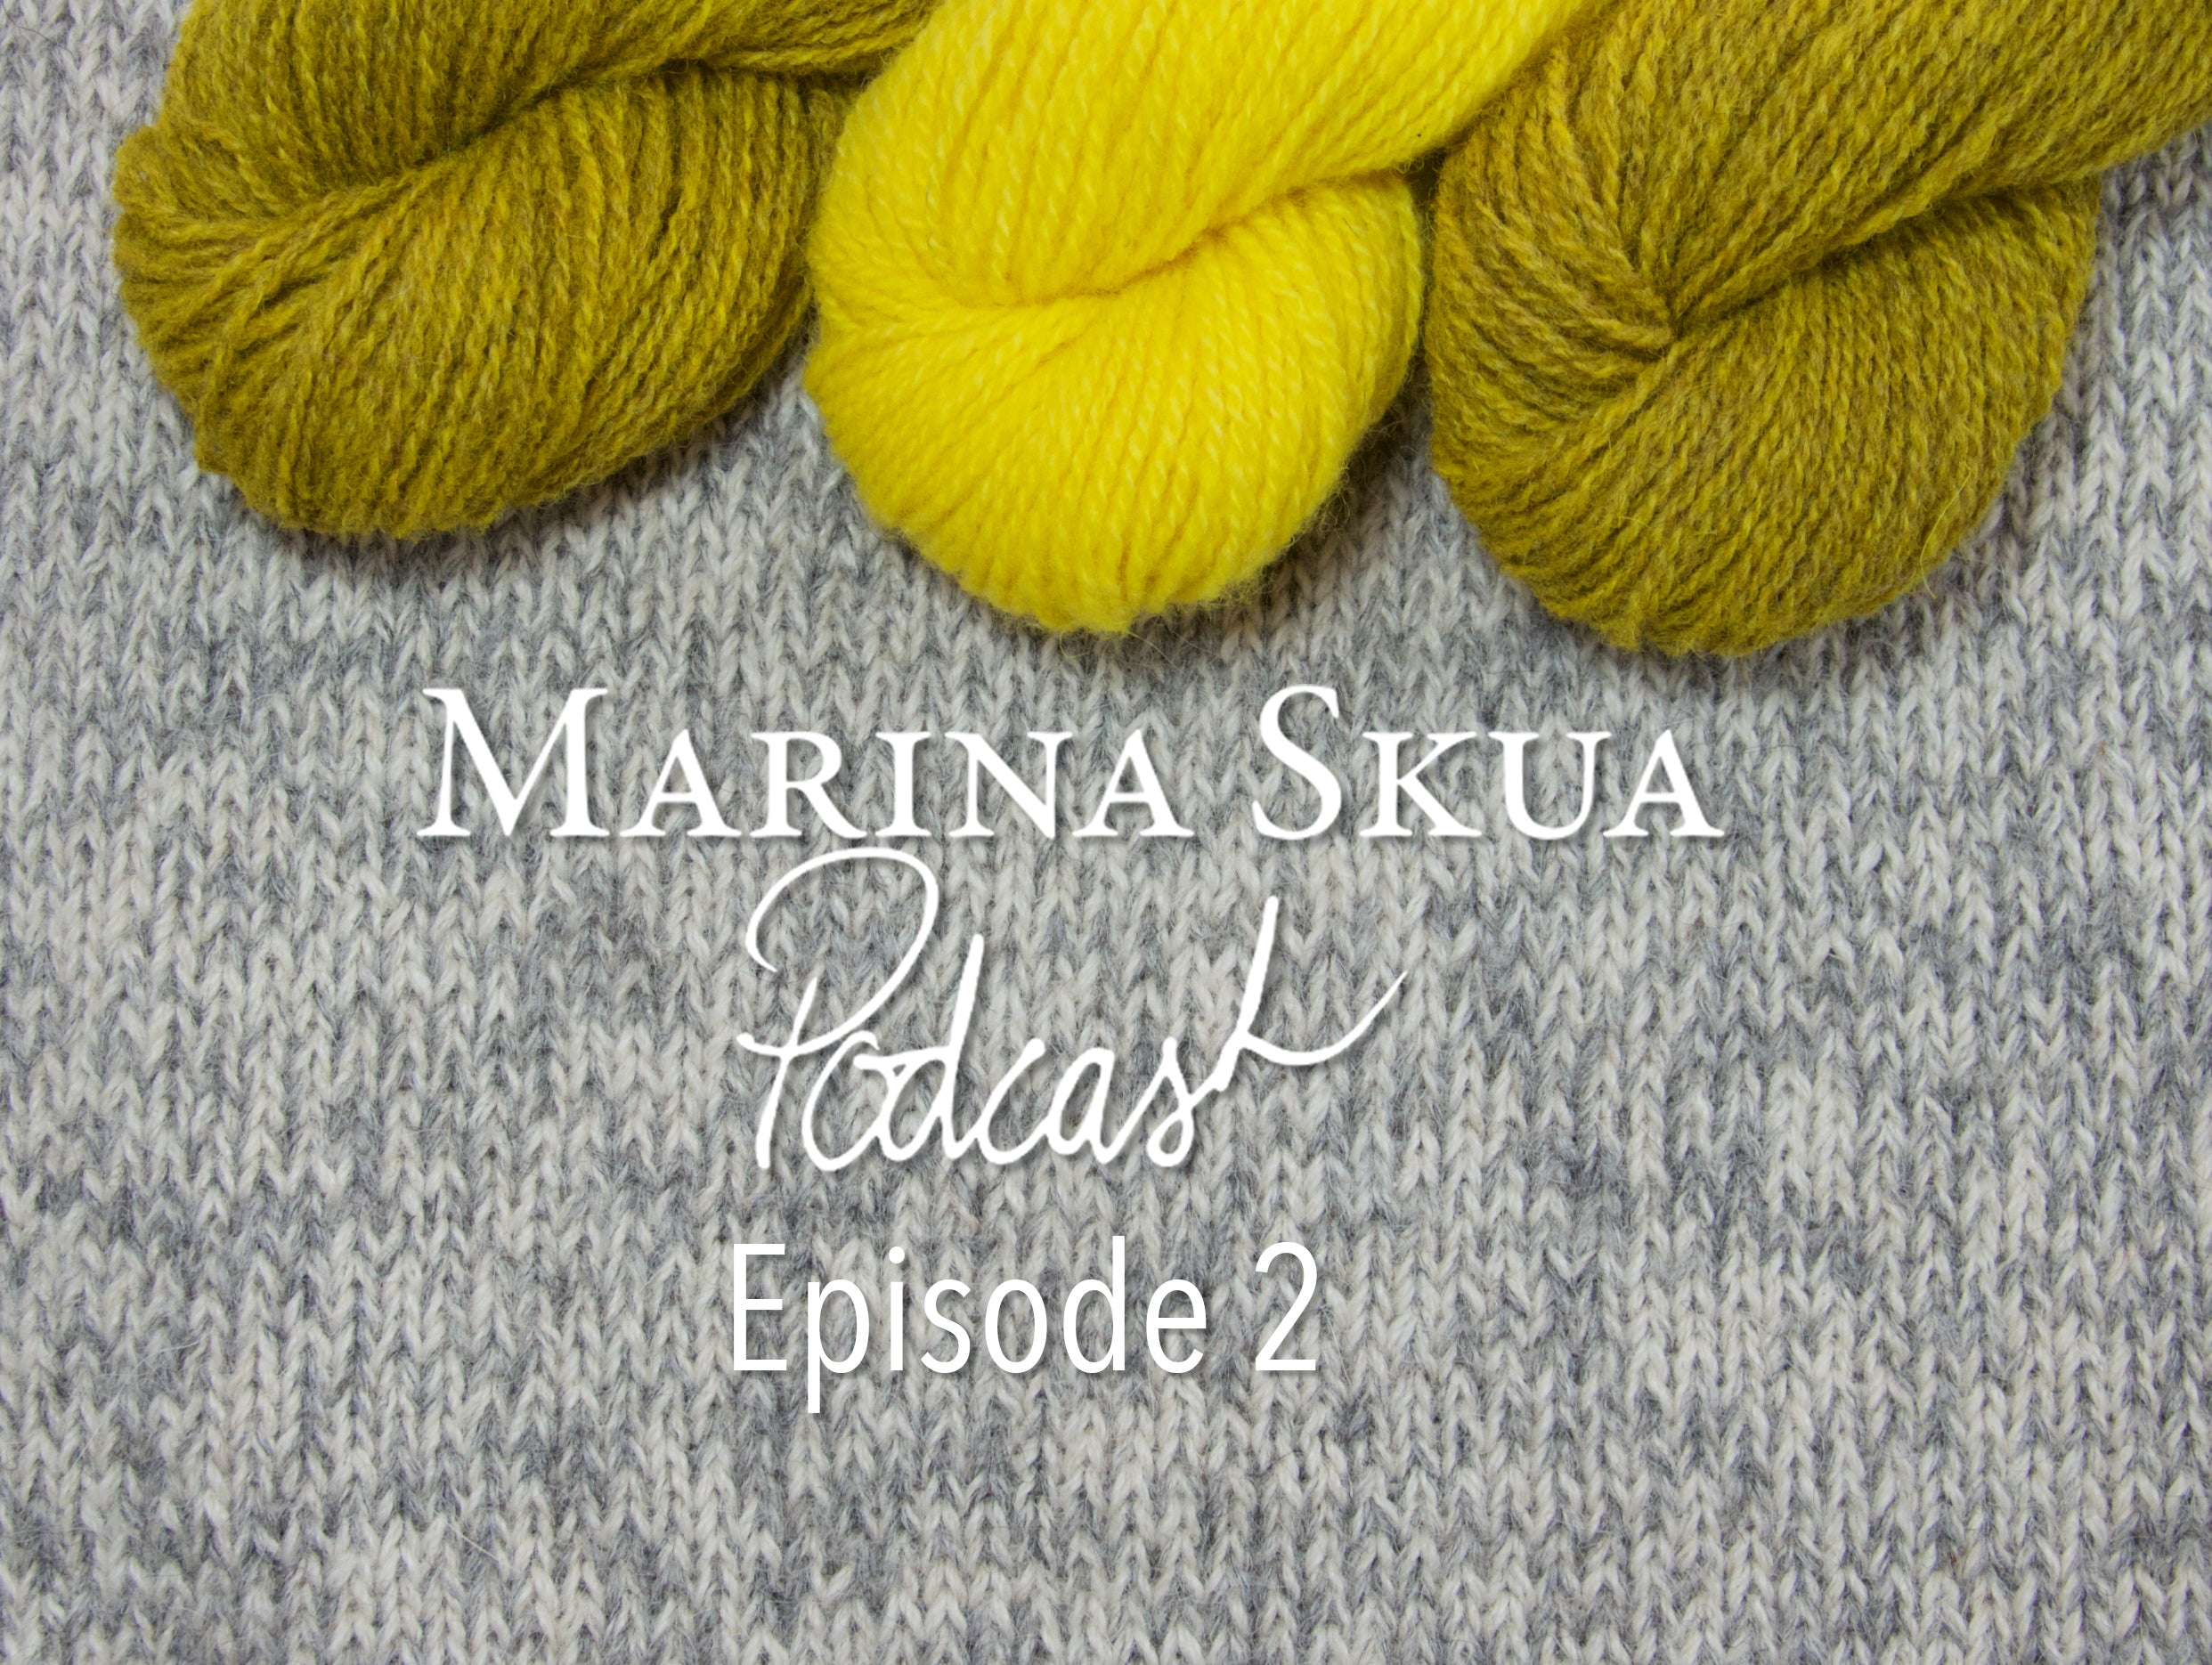 Episode 2 of the Podcast – Mendip KAL, frogging, spinning textured yarn and making sloe gin